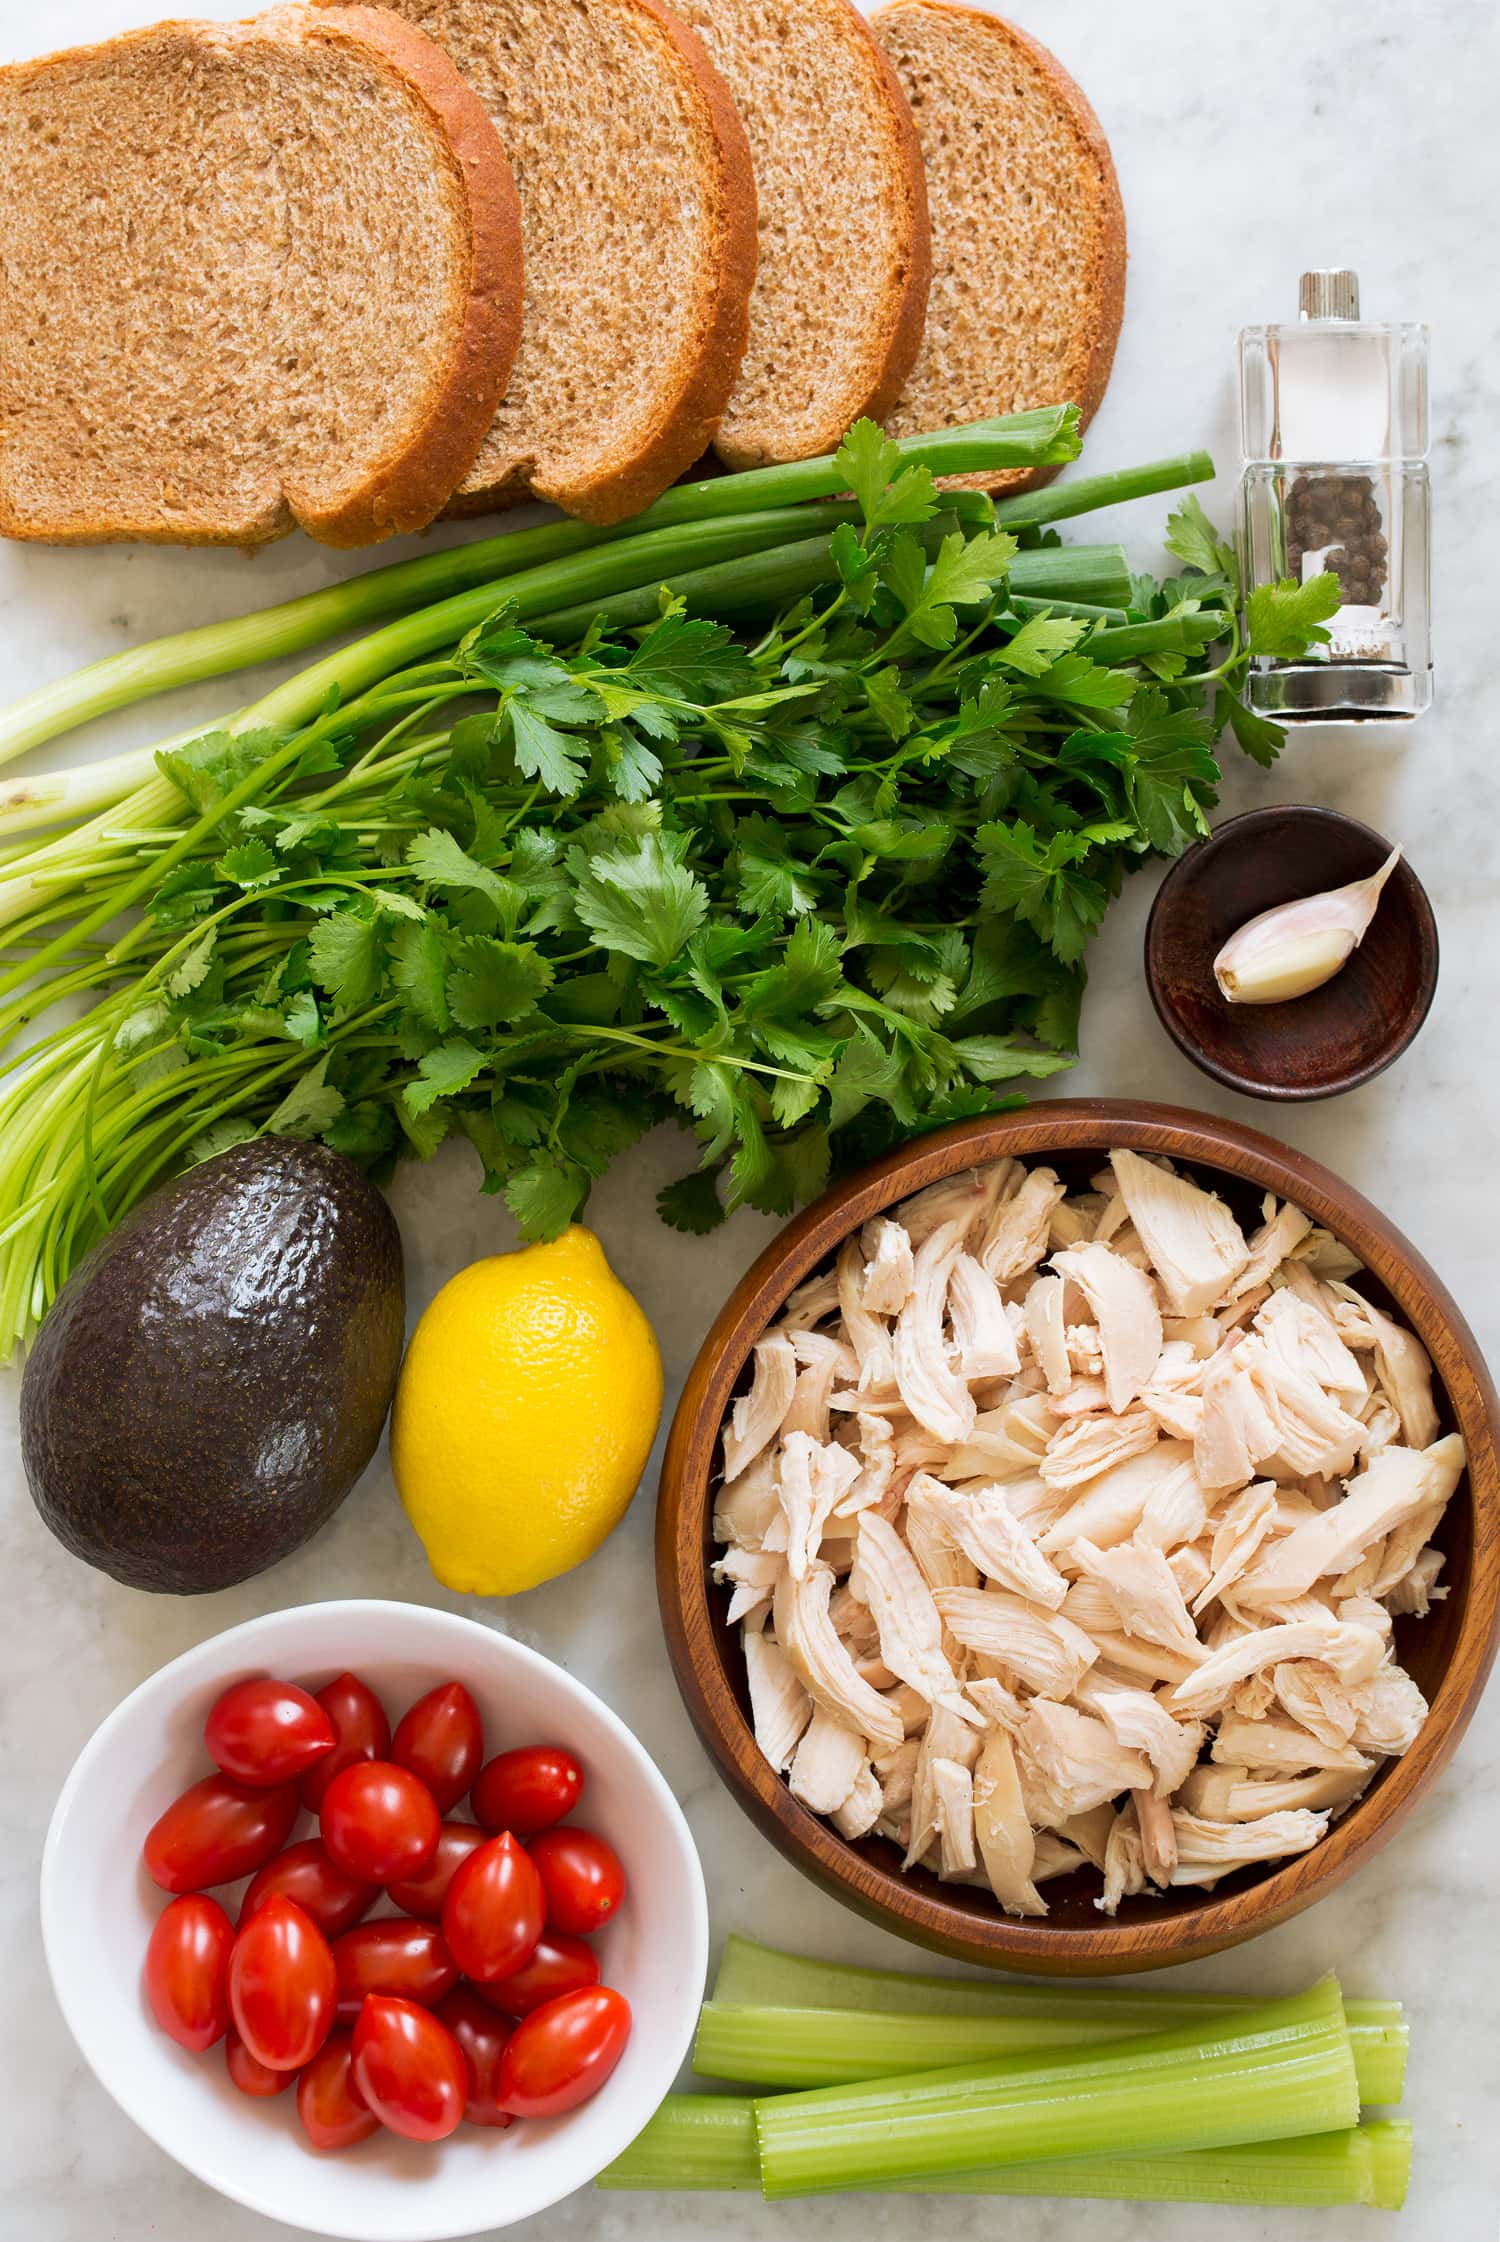 Ingredients used for avocado chicken salad.